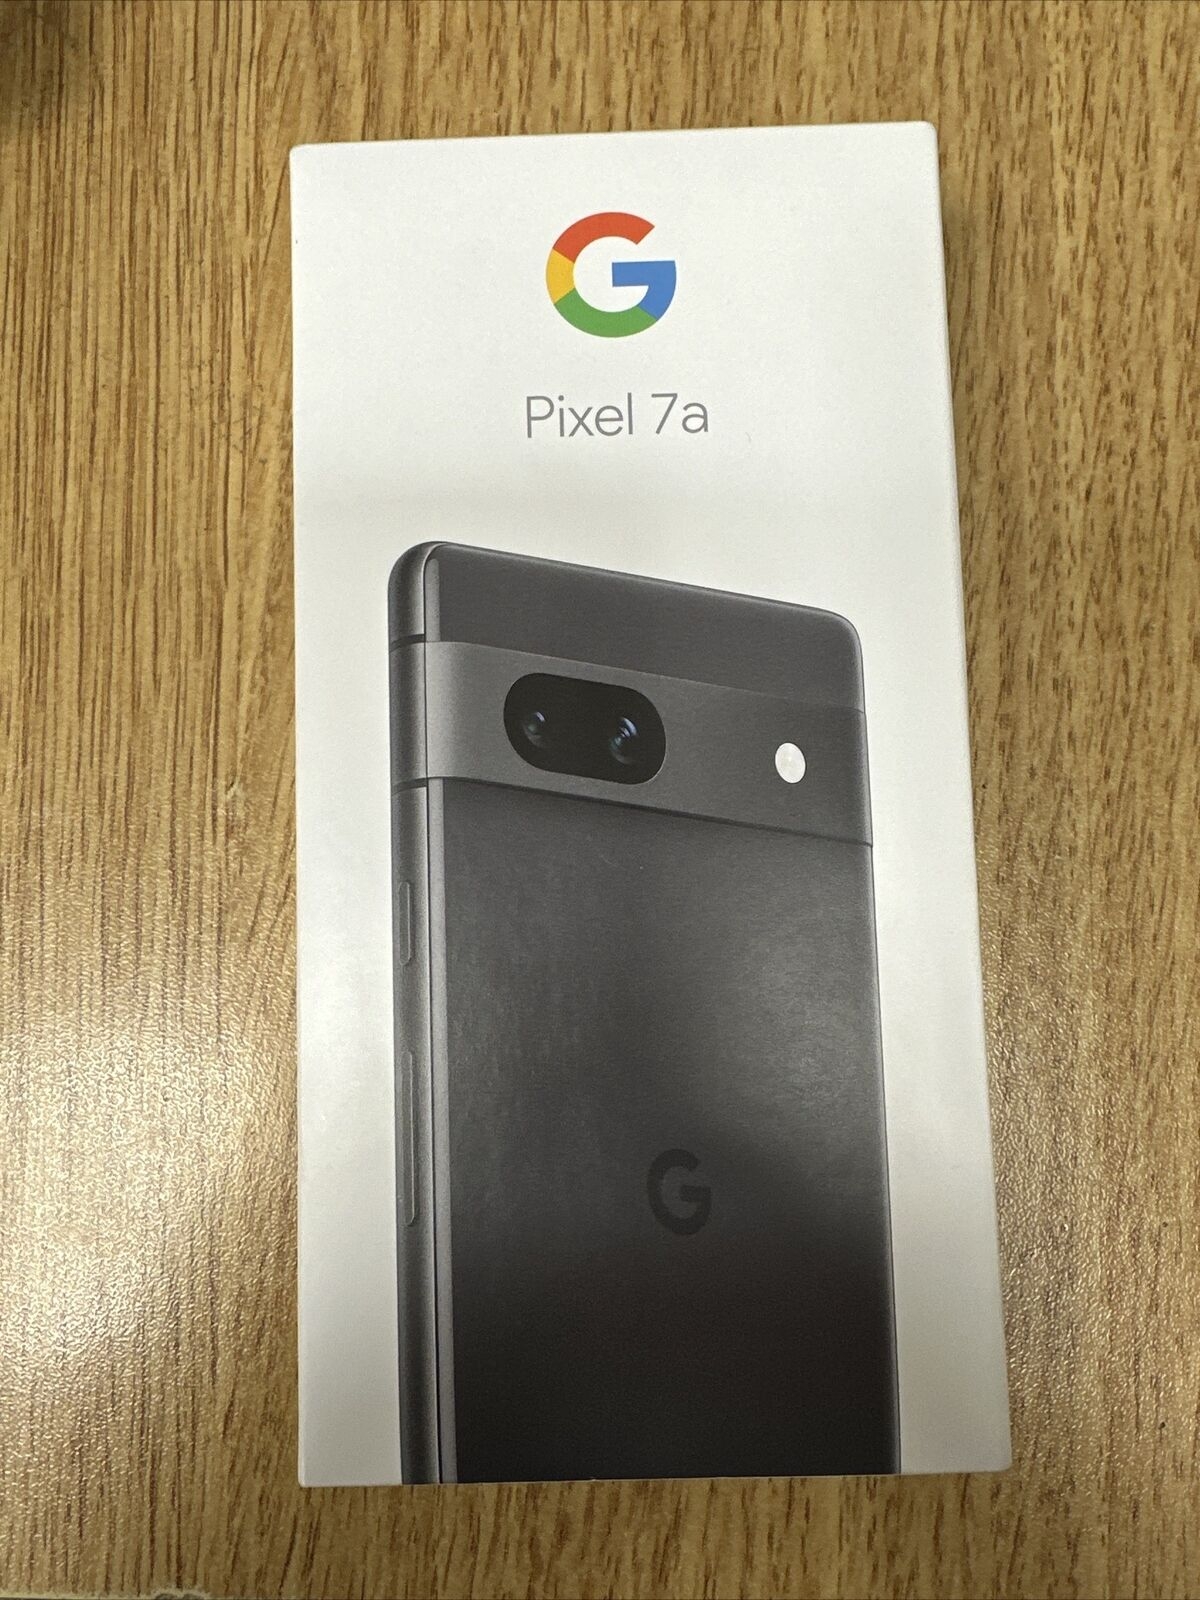 Google Pixel 7a 5g (mare/blu) Ghl1x 128 Gb + 8 Gb Ram Android - Gsm Sbloccato